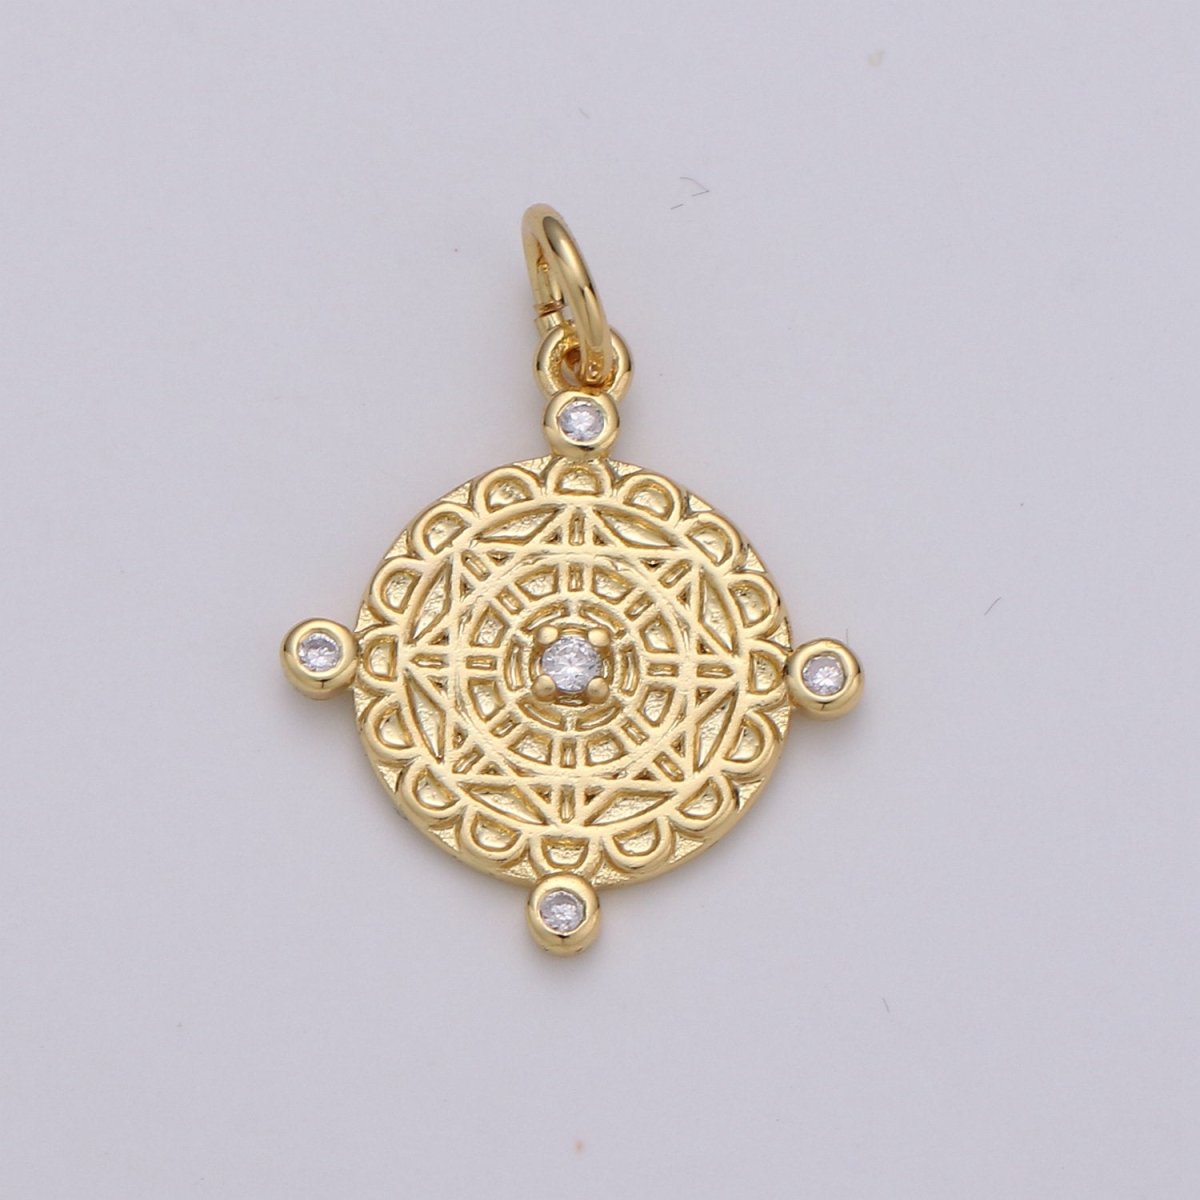 14k Gold Filled Micro Pave CZ Compass Sign Pendant Charm, Dainty Pendant Charm, Gold Filled Travel Pendant, For DIY Jewelry Making D-452 D-453 - DLUXCA